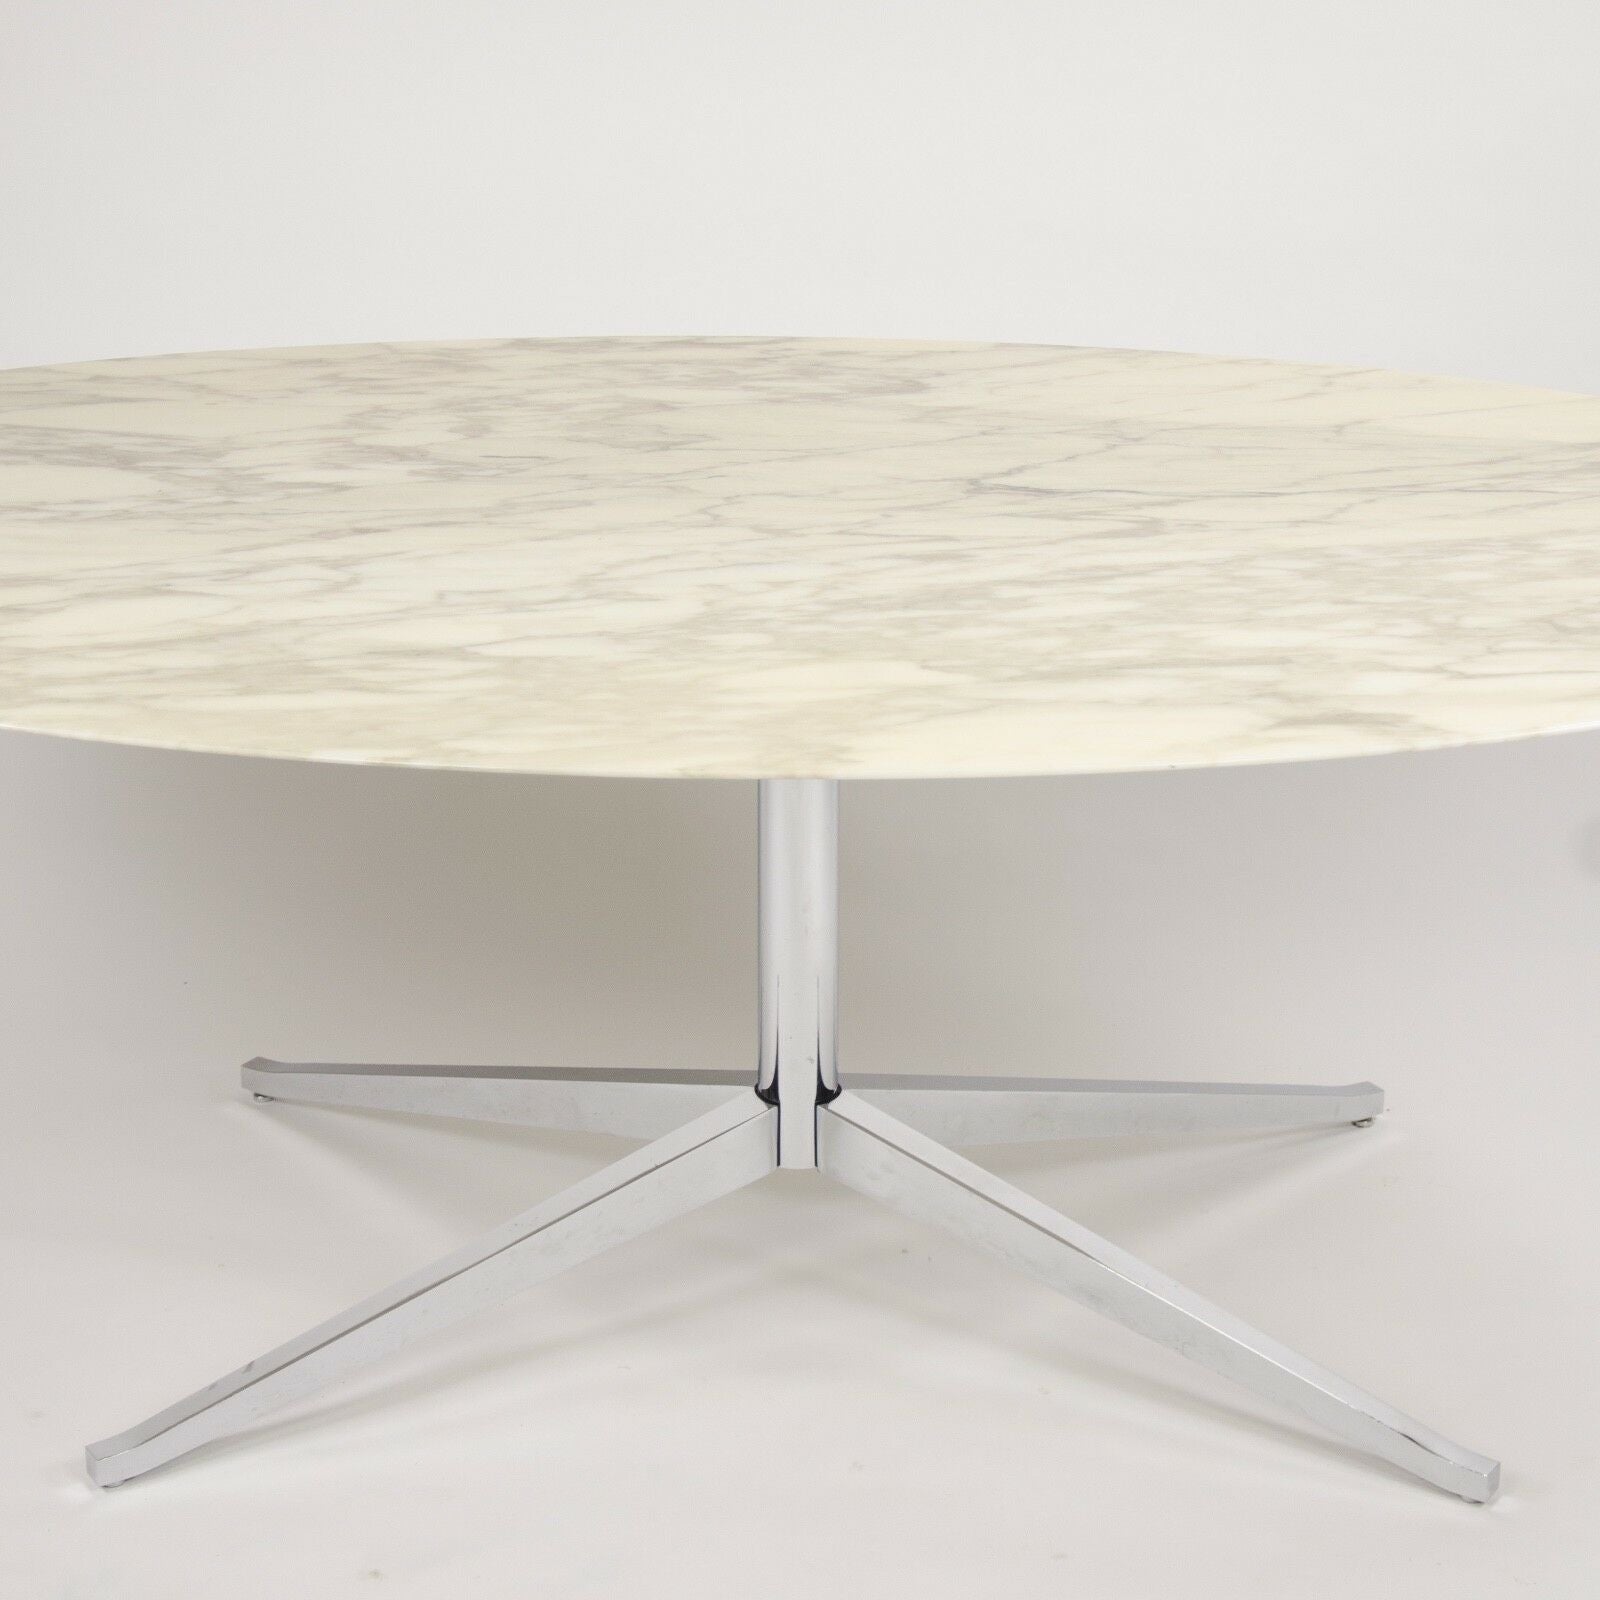 SOLD 2007 Florence Knoll 78in Arabescato Marble Dining Conference Table